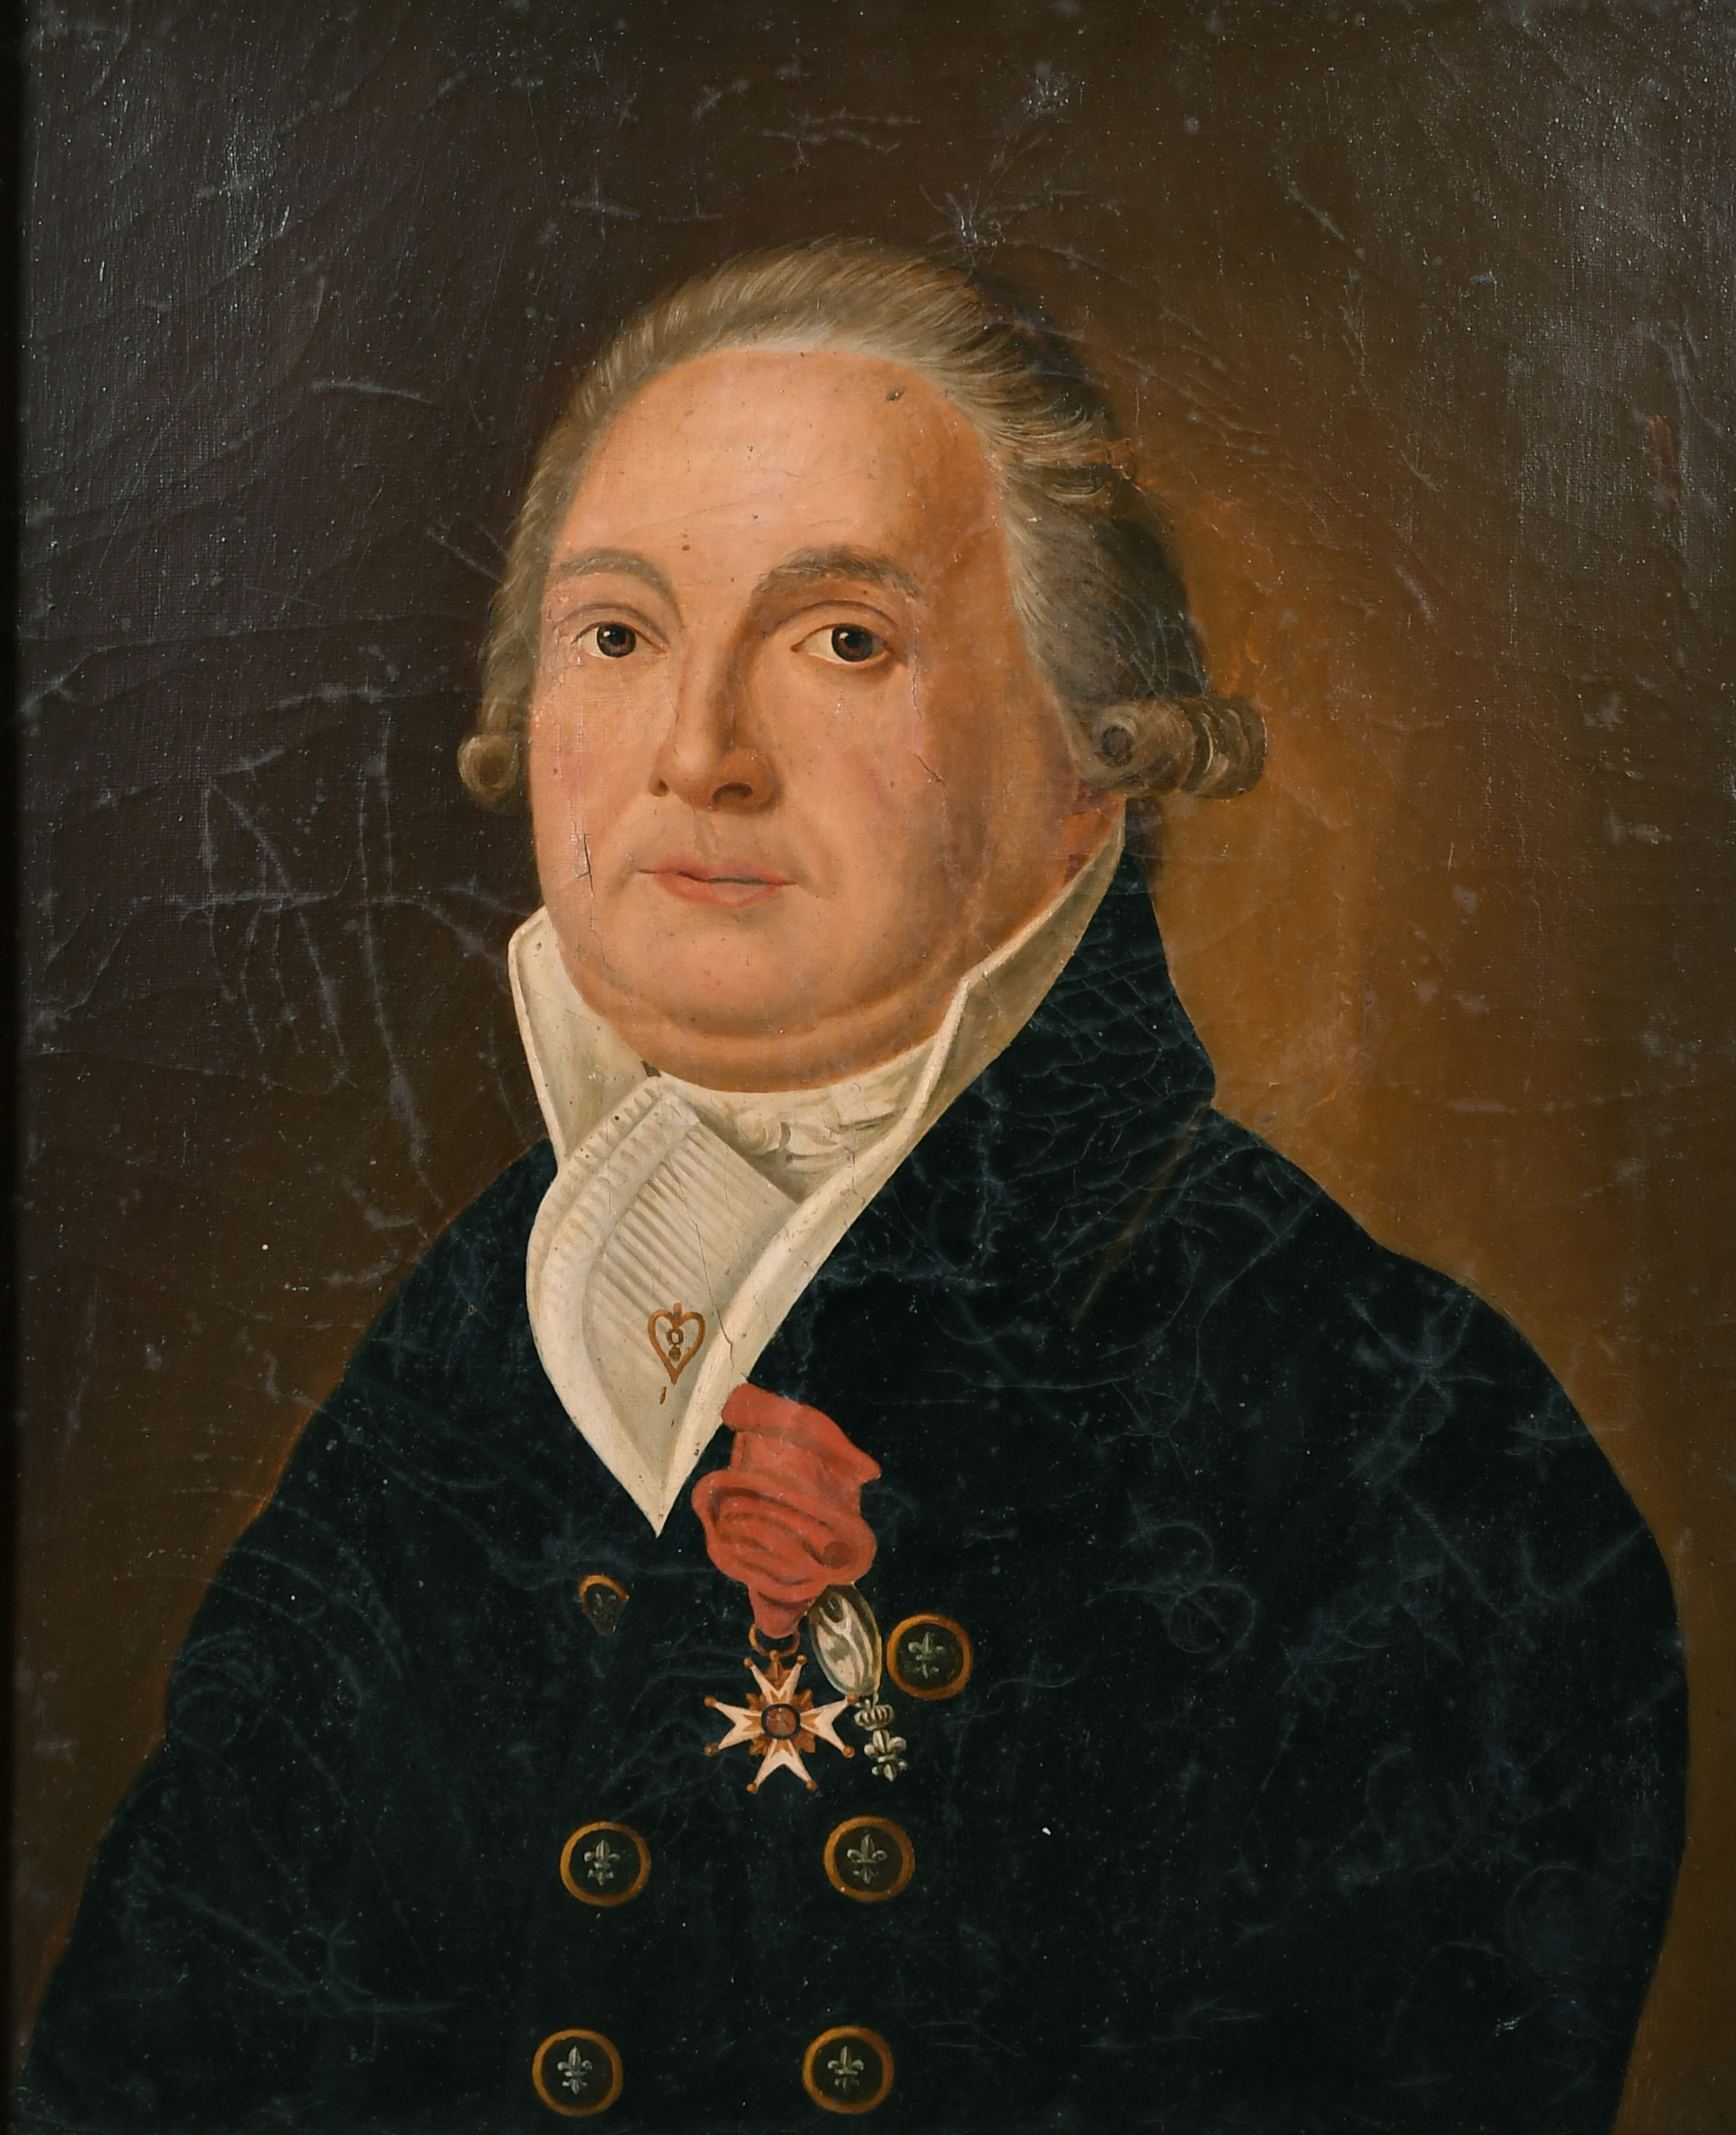 19th Century French School. Bust Portrait of a Wigged Gentleman, Oil on Canvas, 23.25" x 19.25" (